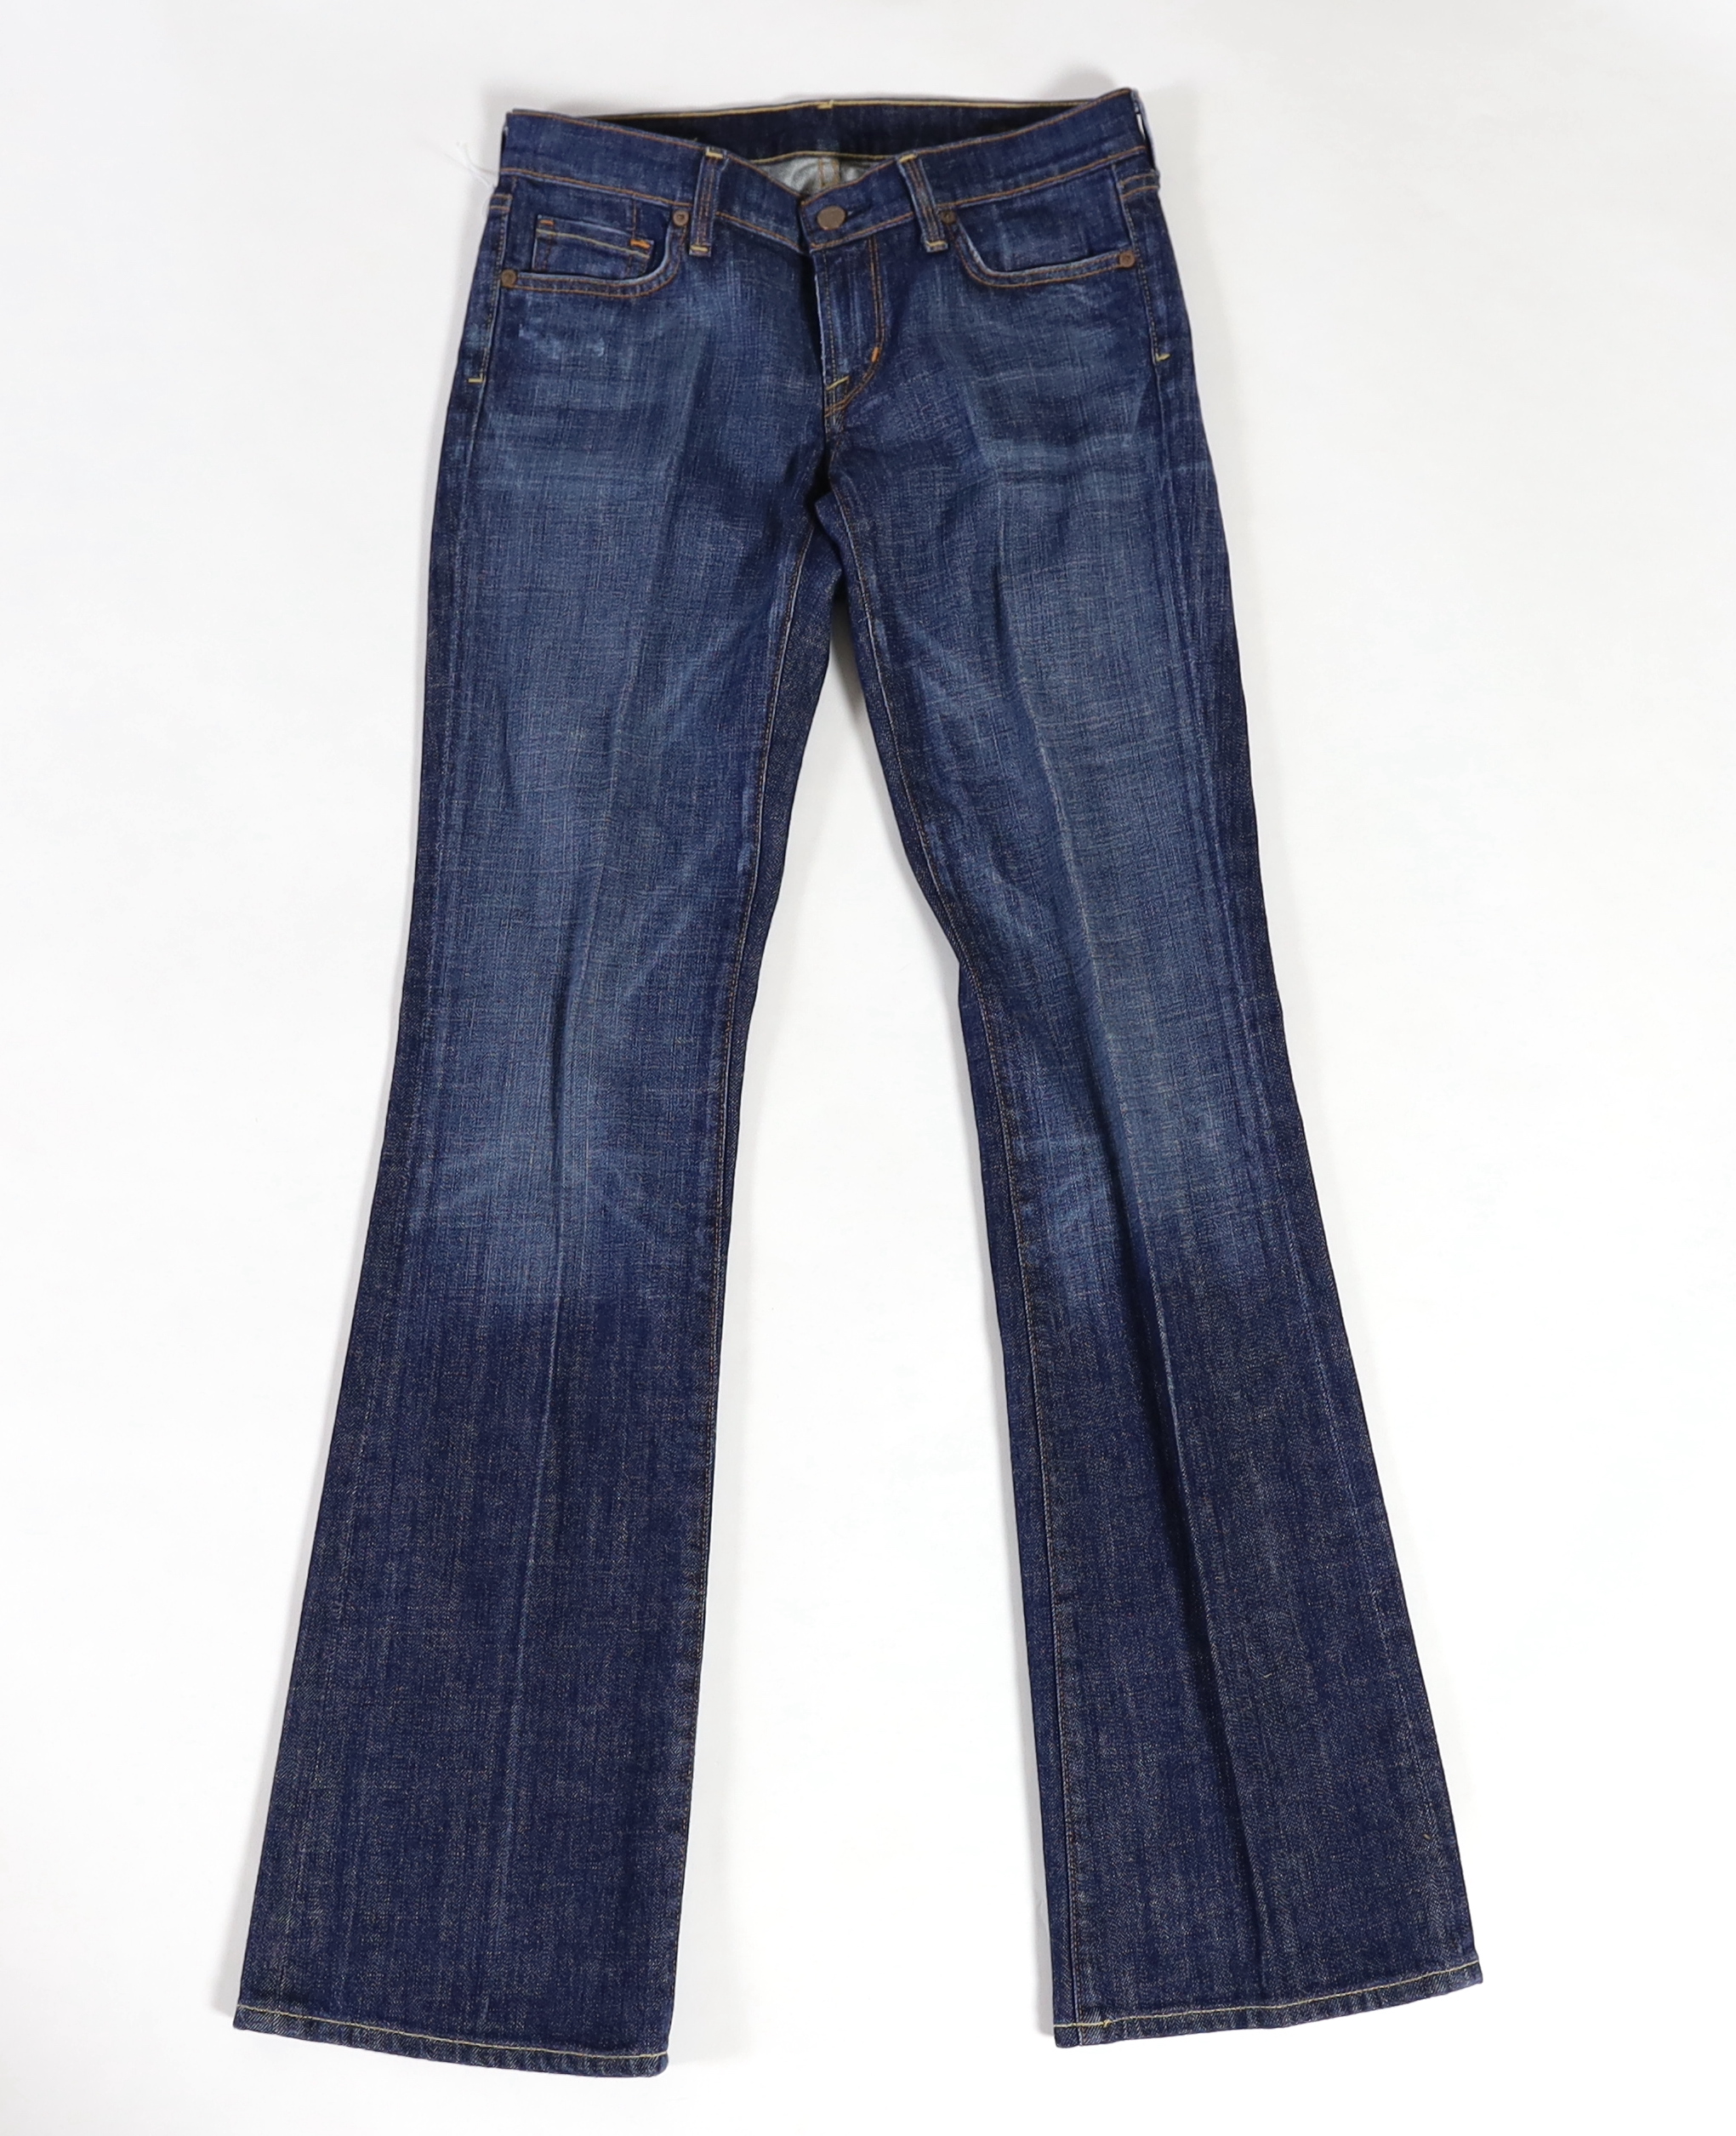 Three pairs of 7 All Mankind lady's jeans size 28